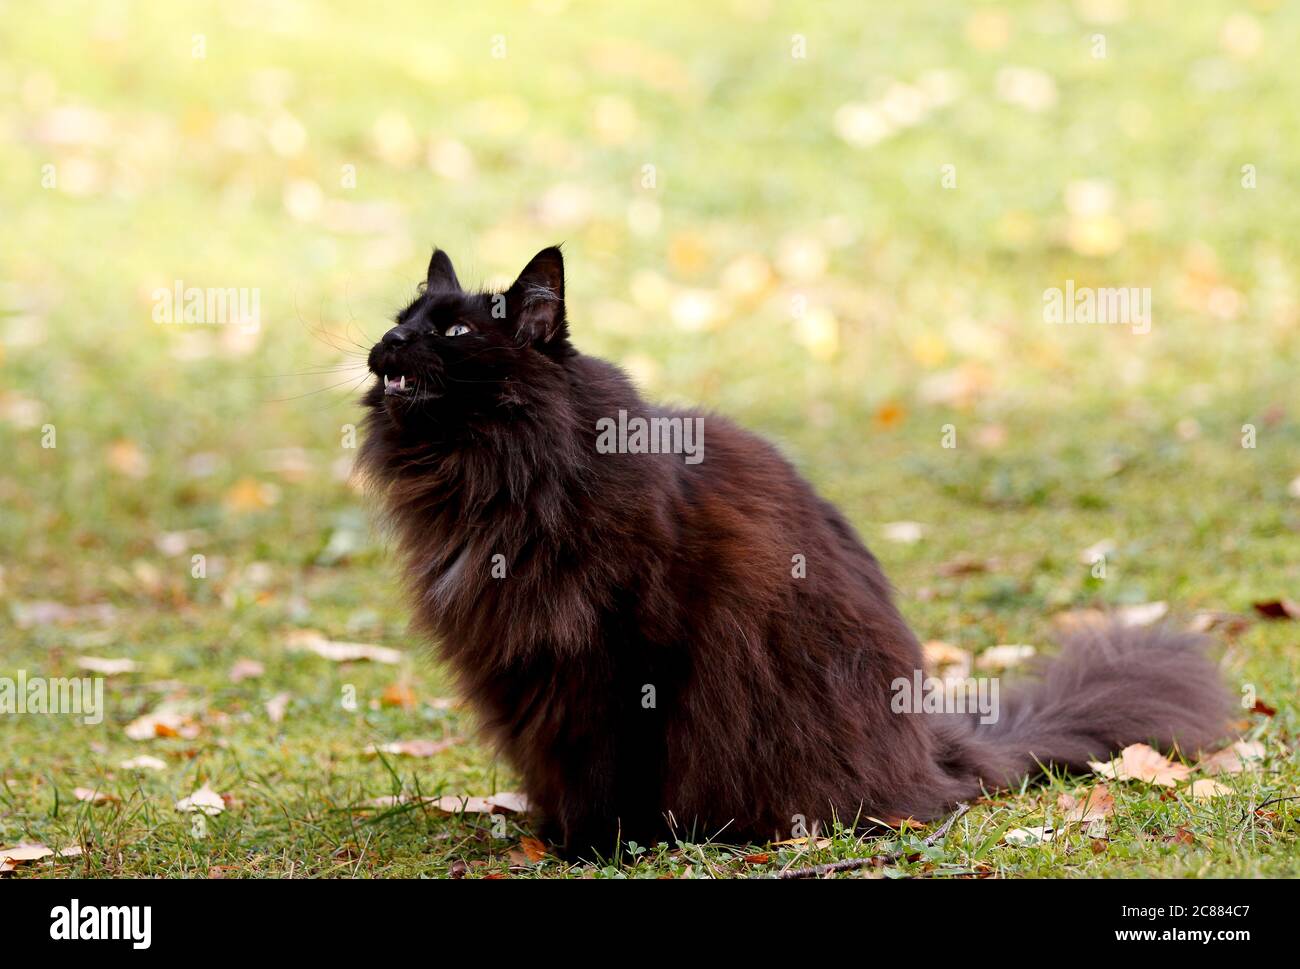 A black norwegian forest cat with her mouth opened waiting for a potential flying catch Stock Photo